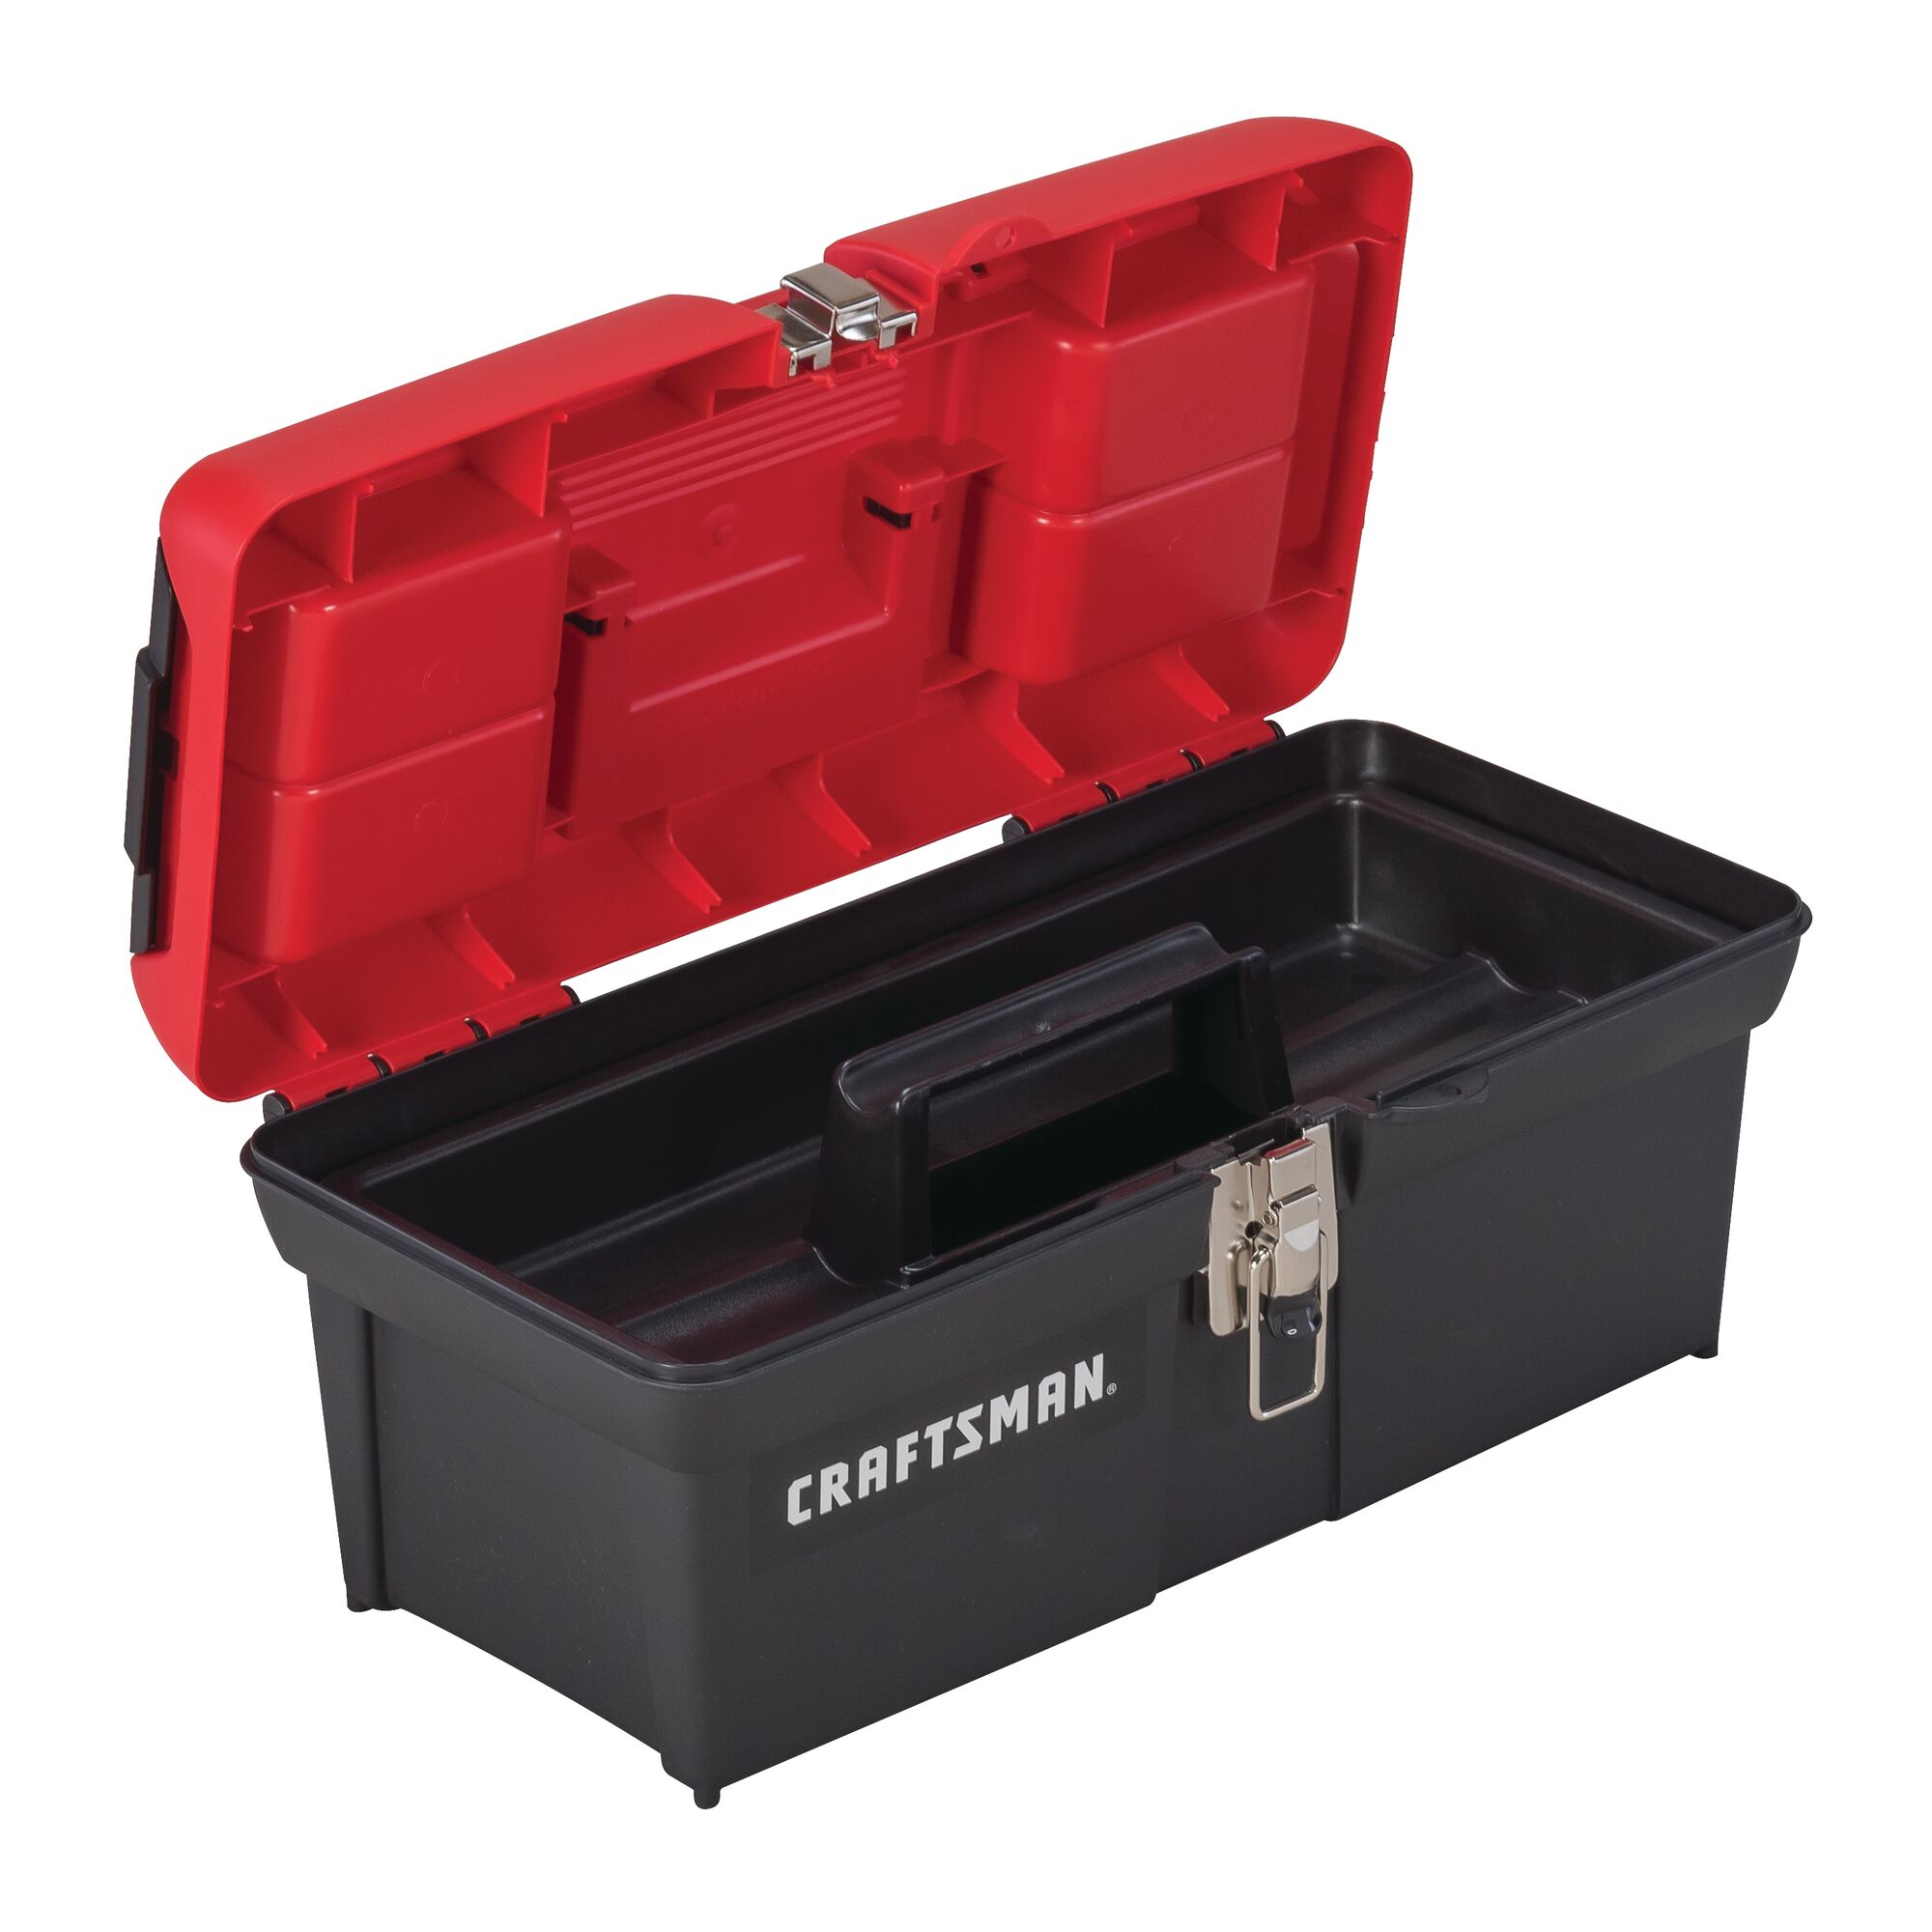 View of CRAFTSMAN Storage: Tool Boxes on white background